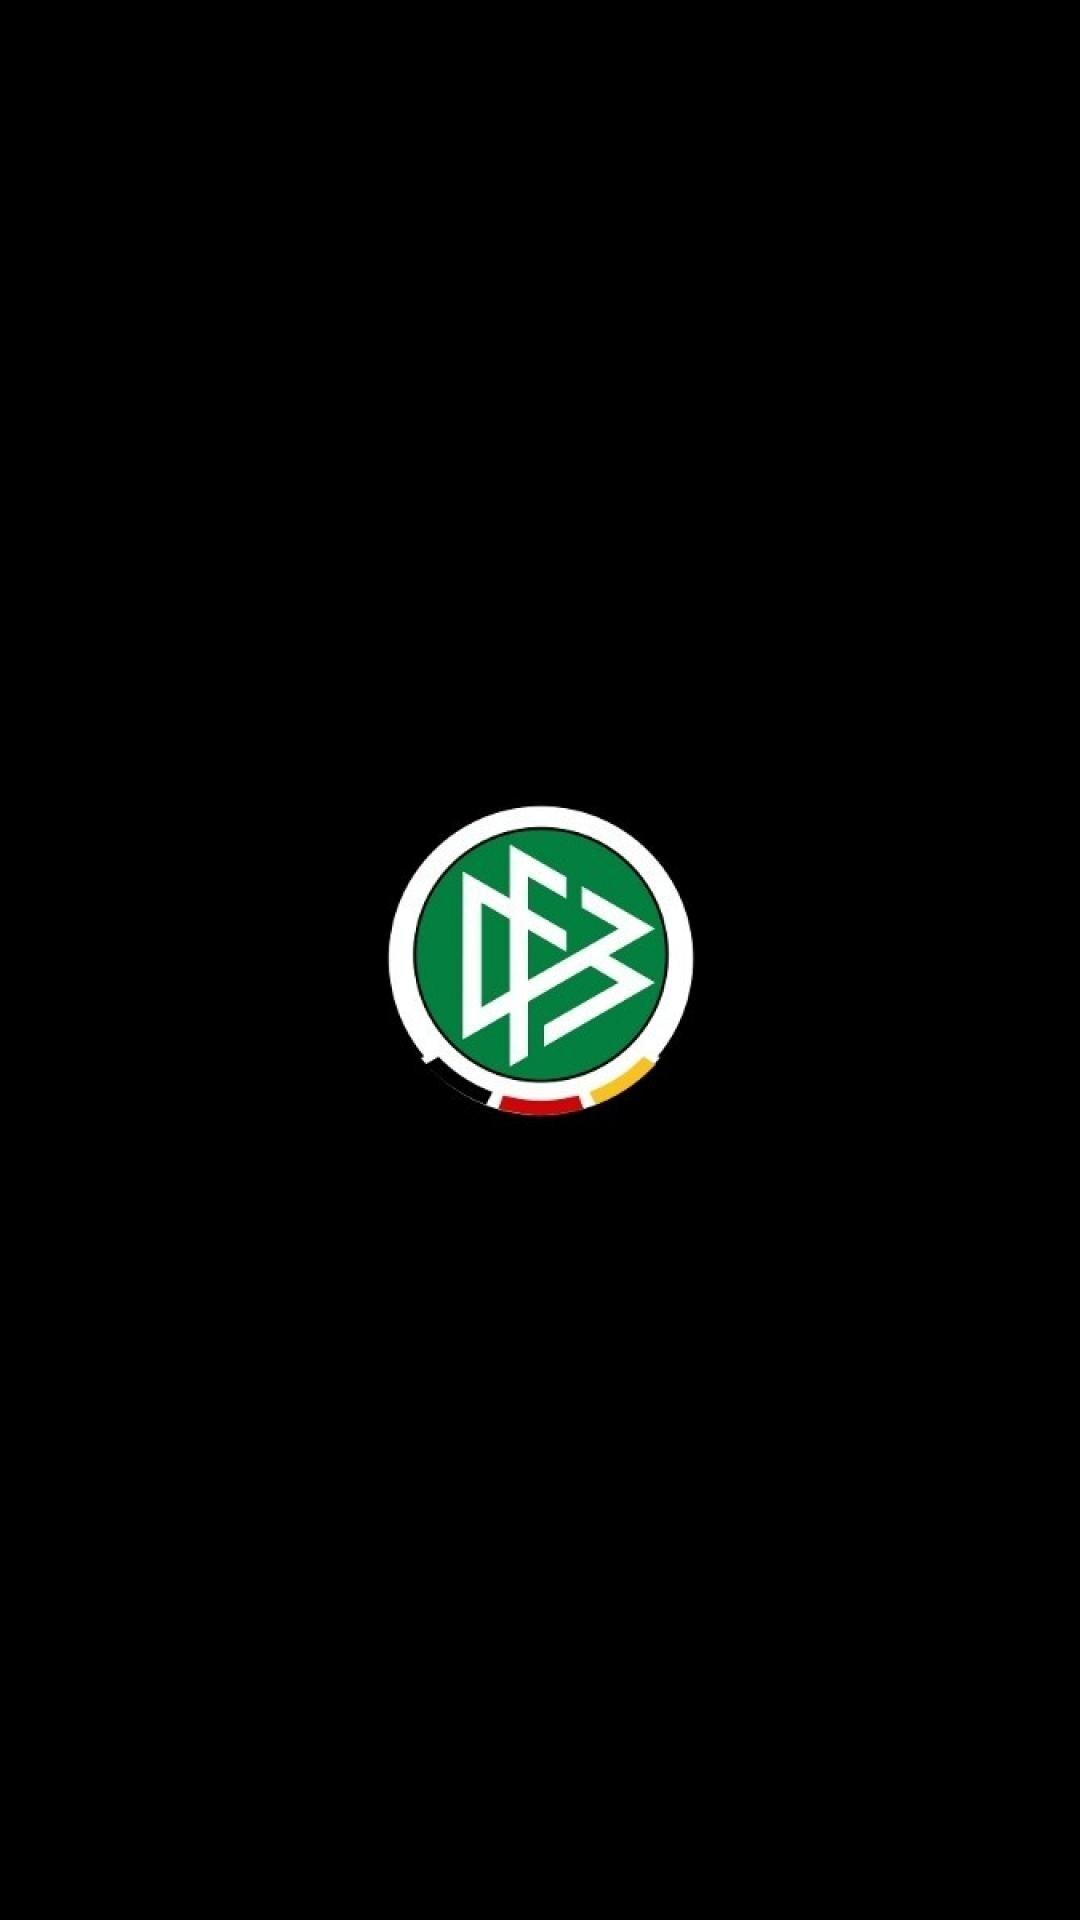 Germany Soccer Team: The German Football Association, A founding member of both FIFA and UEFA. 1080x1920 Full HD Background.